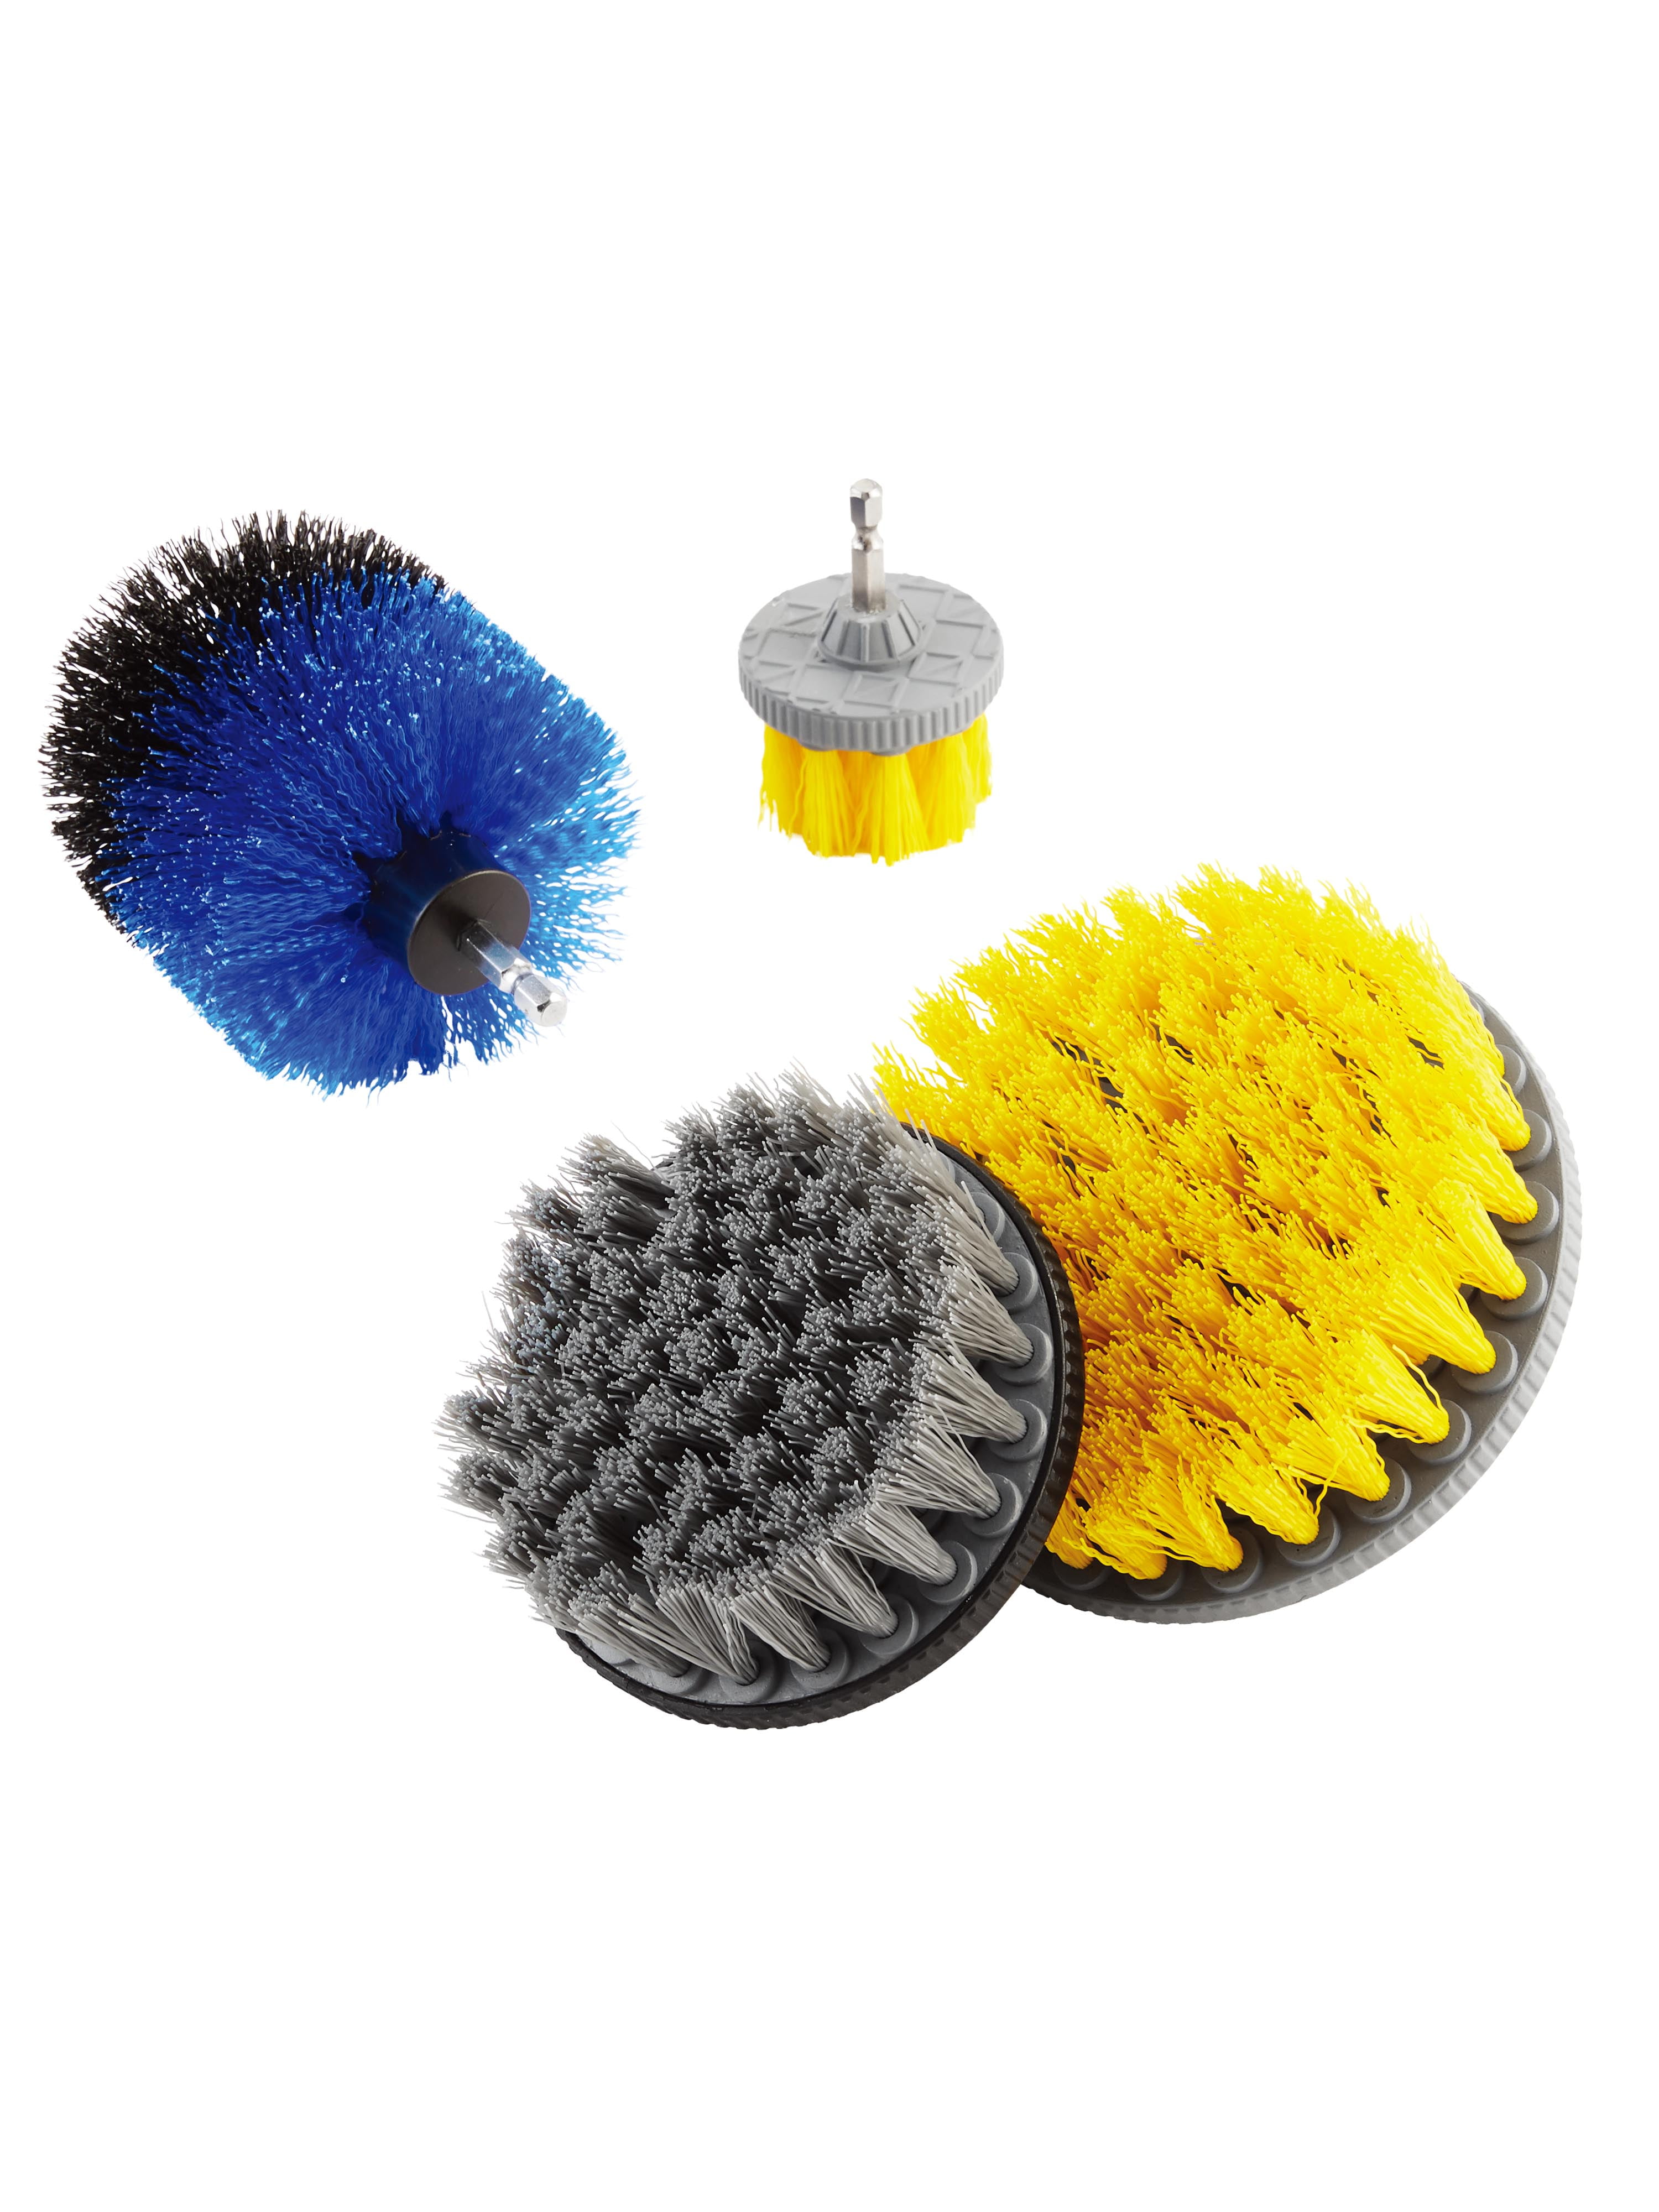 Auto Drive Brand 2 inch/3.5 inch/4 inch/5 inch Drill Brush Cleaning Kit for Car , Household Cleaning Brush Type.